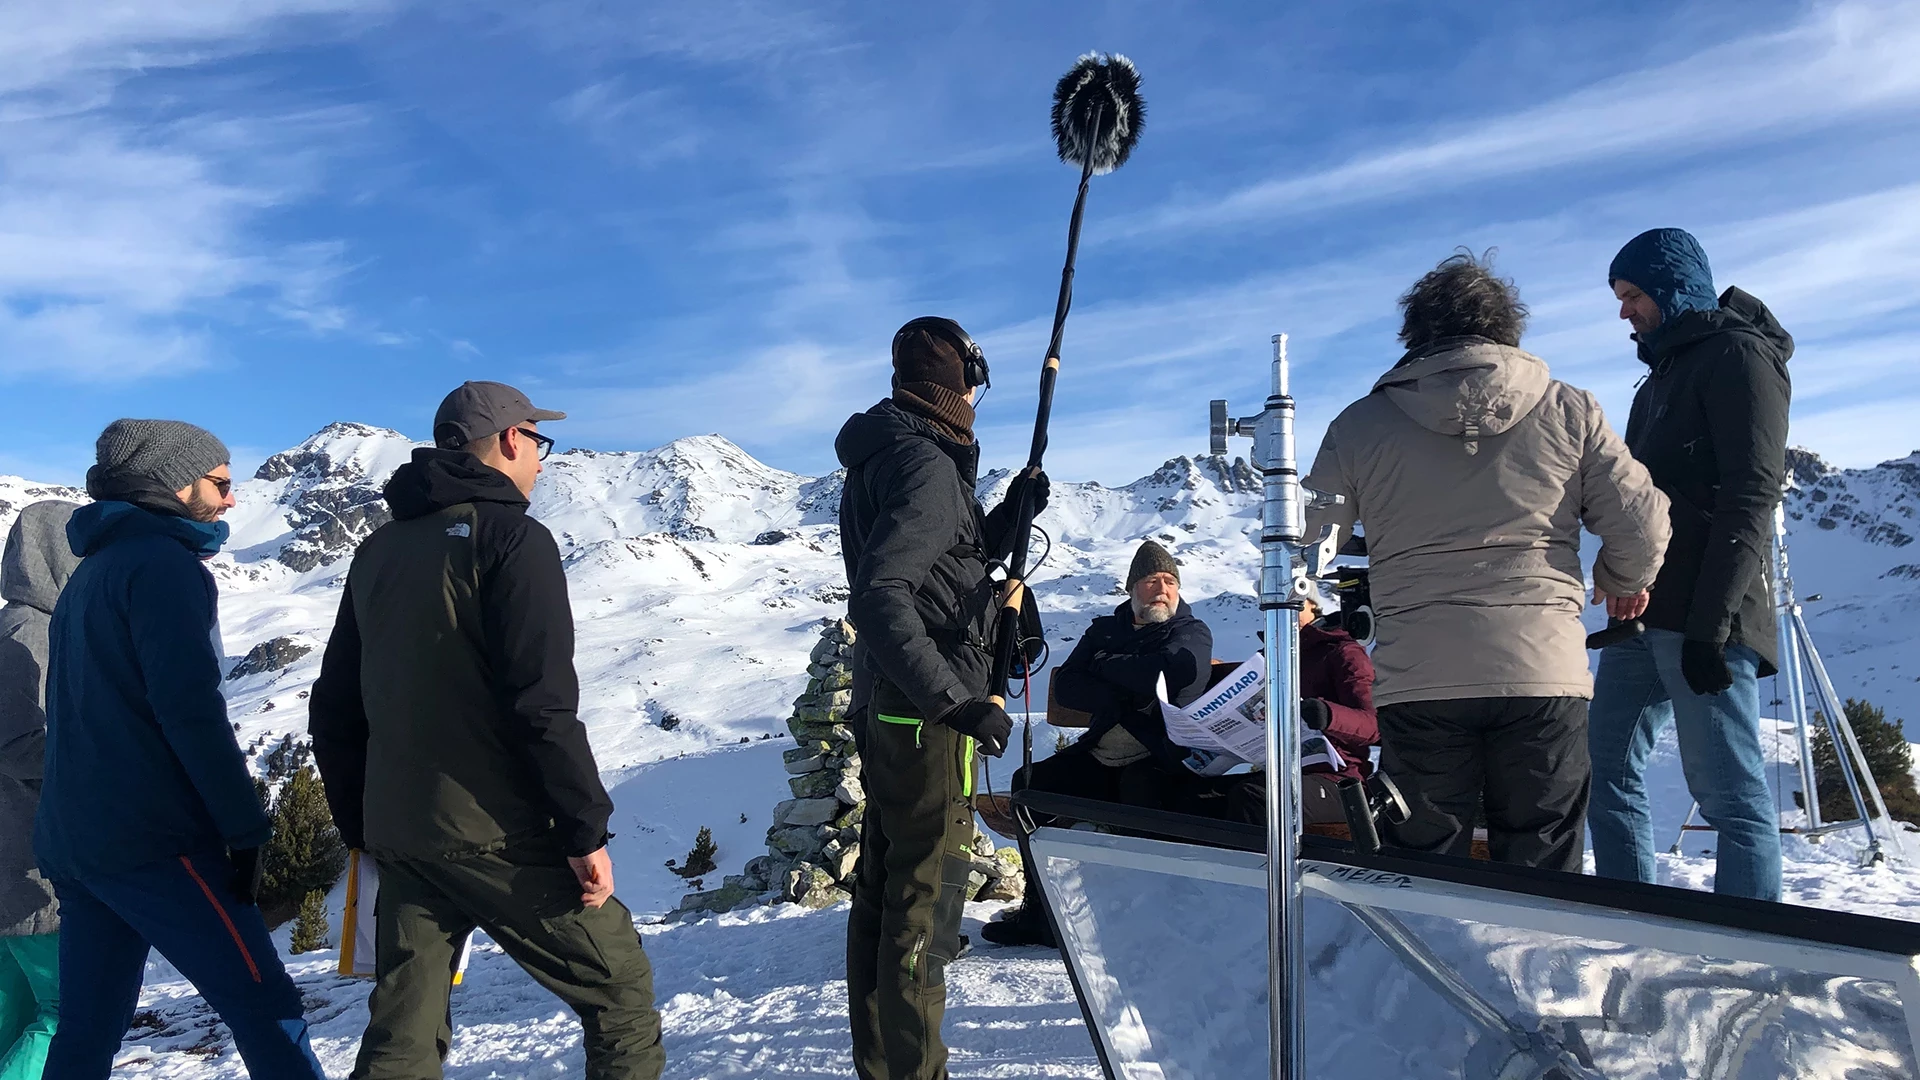 behind the scene picture in the mountains with all the crew